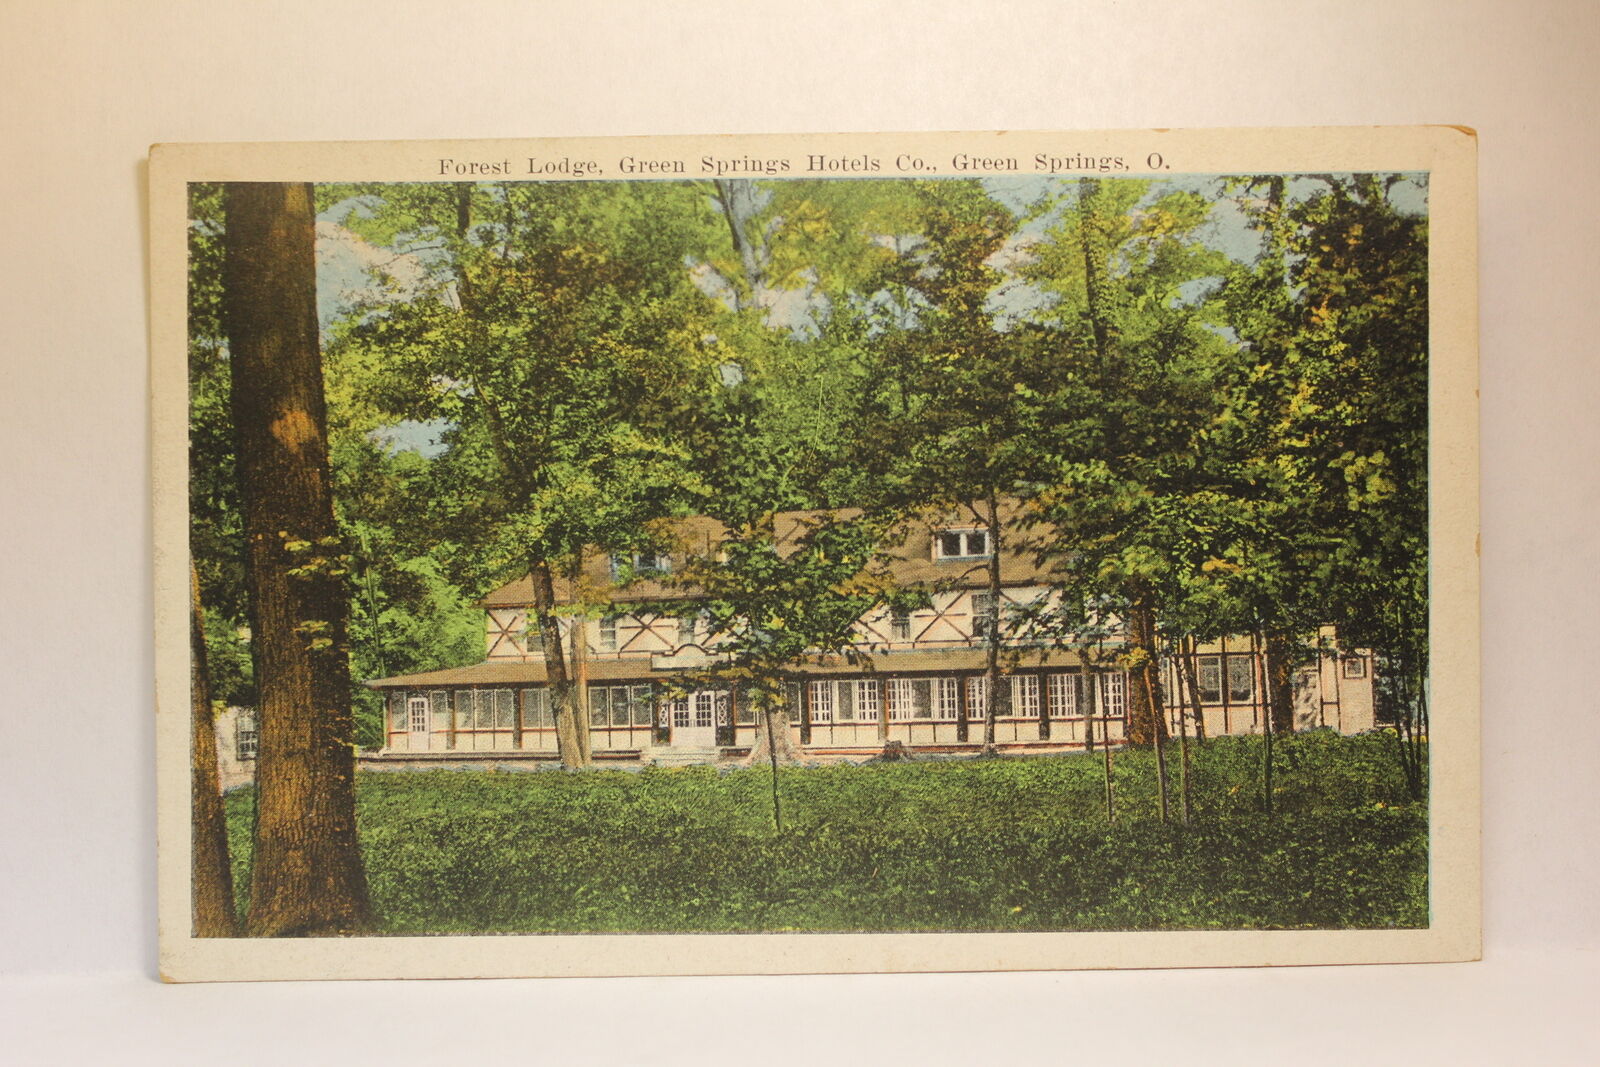 Postcard Floral Lodge Green Springs Hotels Co. Green Springs OH Q27